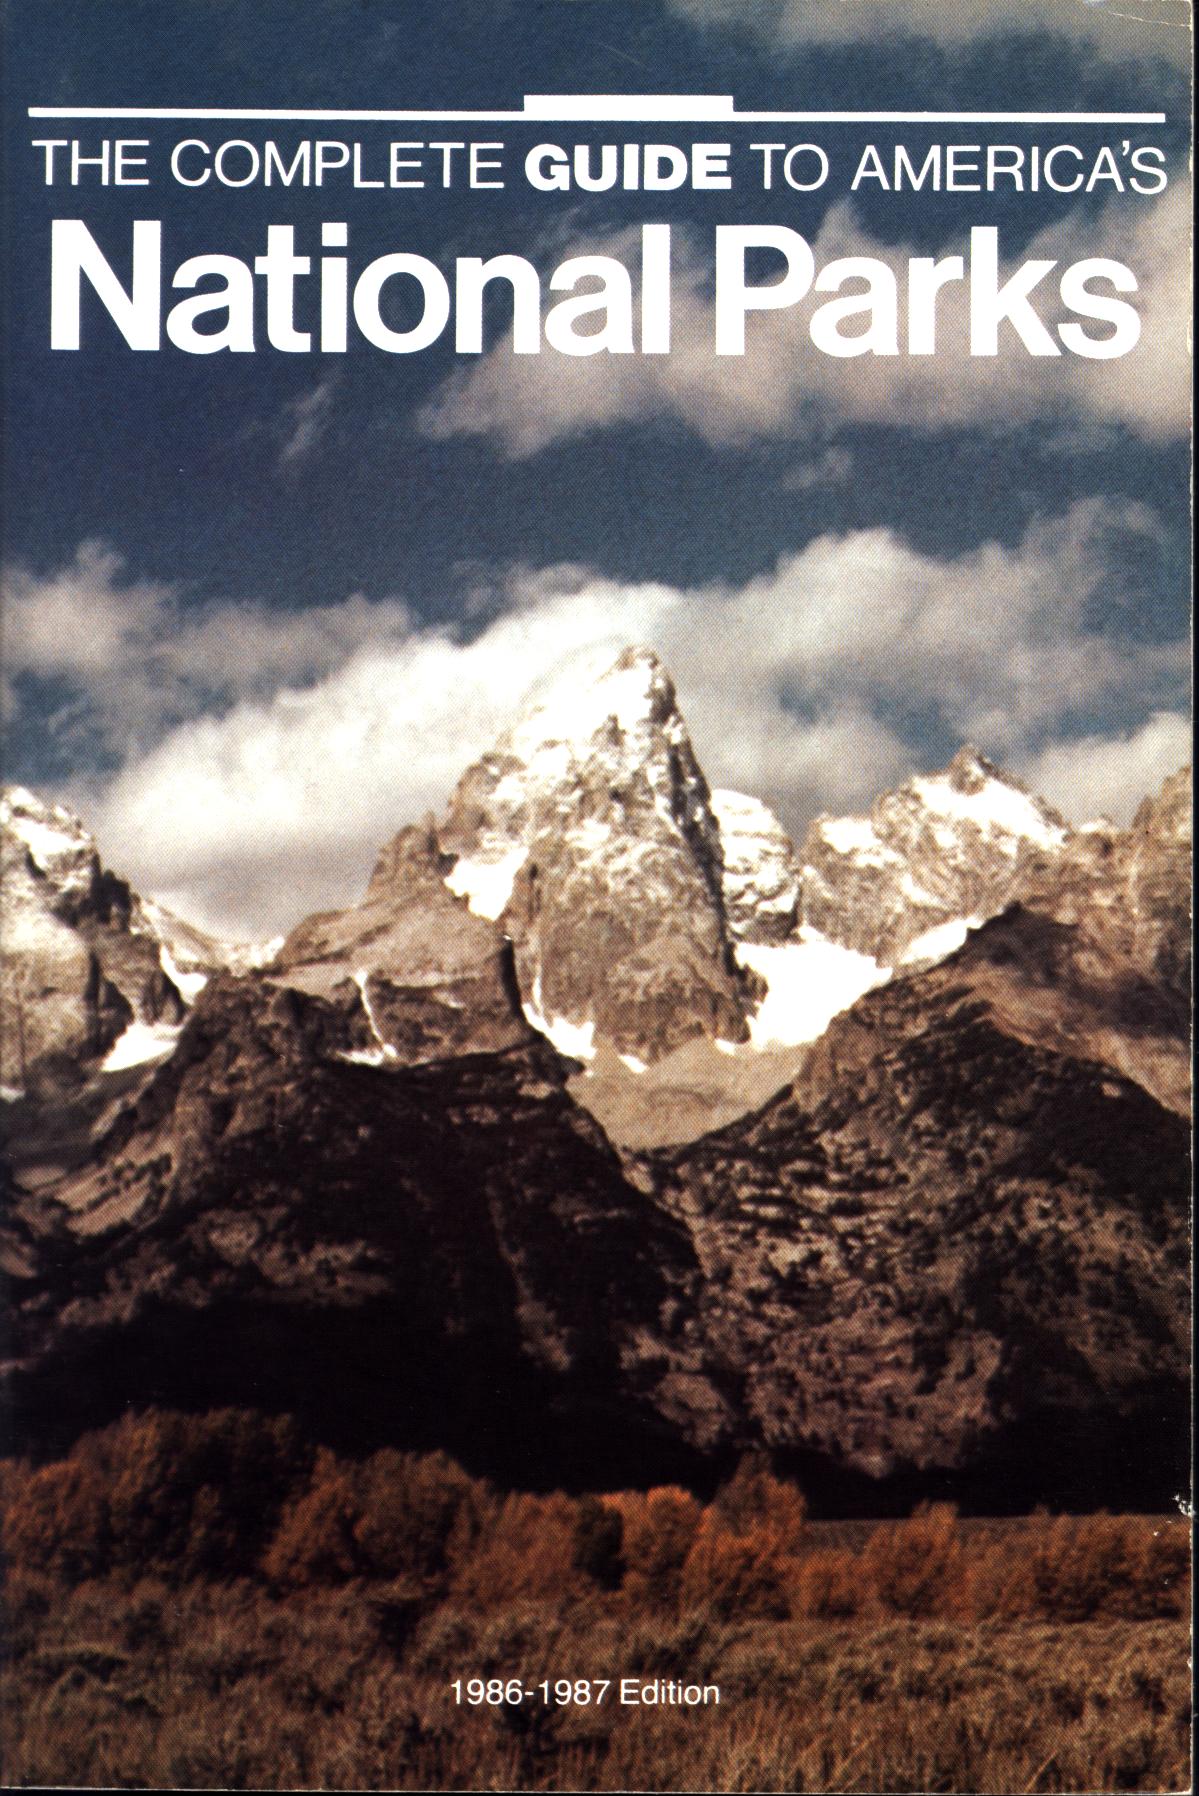 THE COMPLETE GUIDE TO AMERICA'S NATIONAL PARKS. 